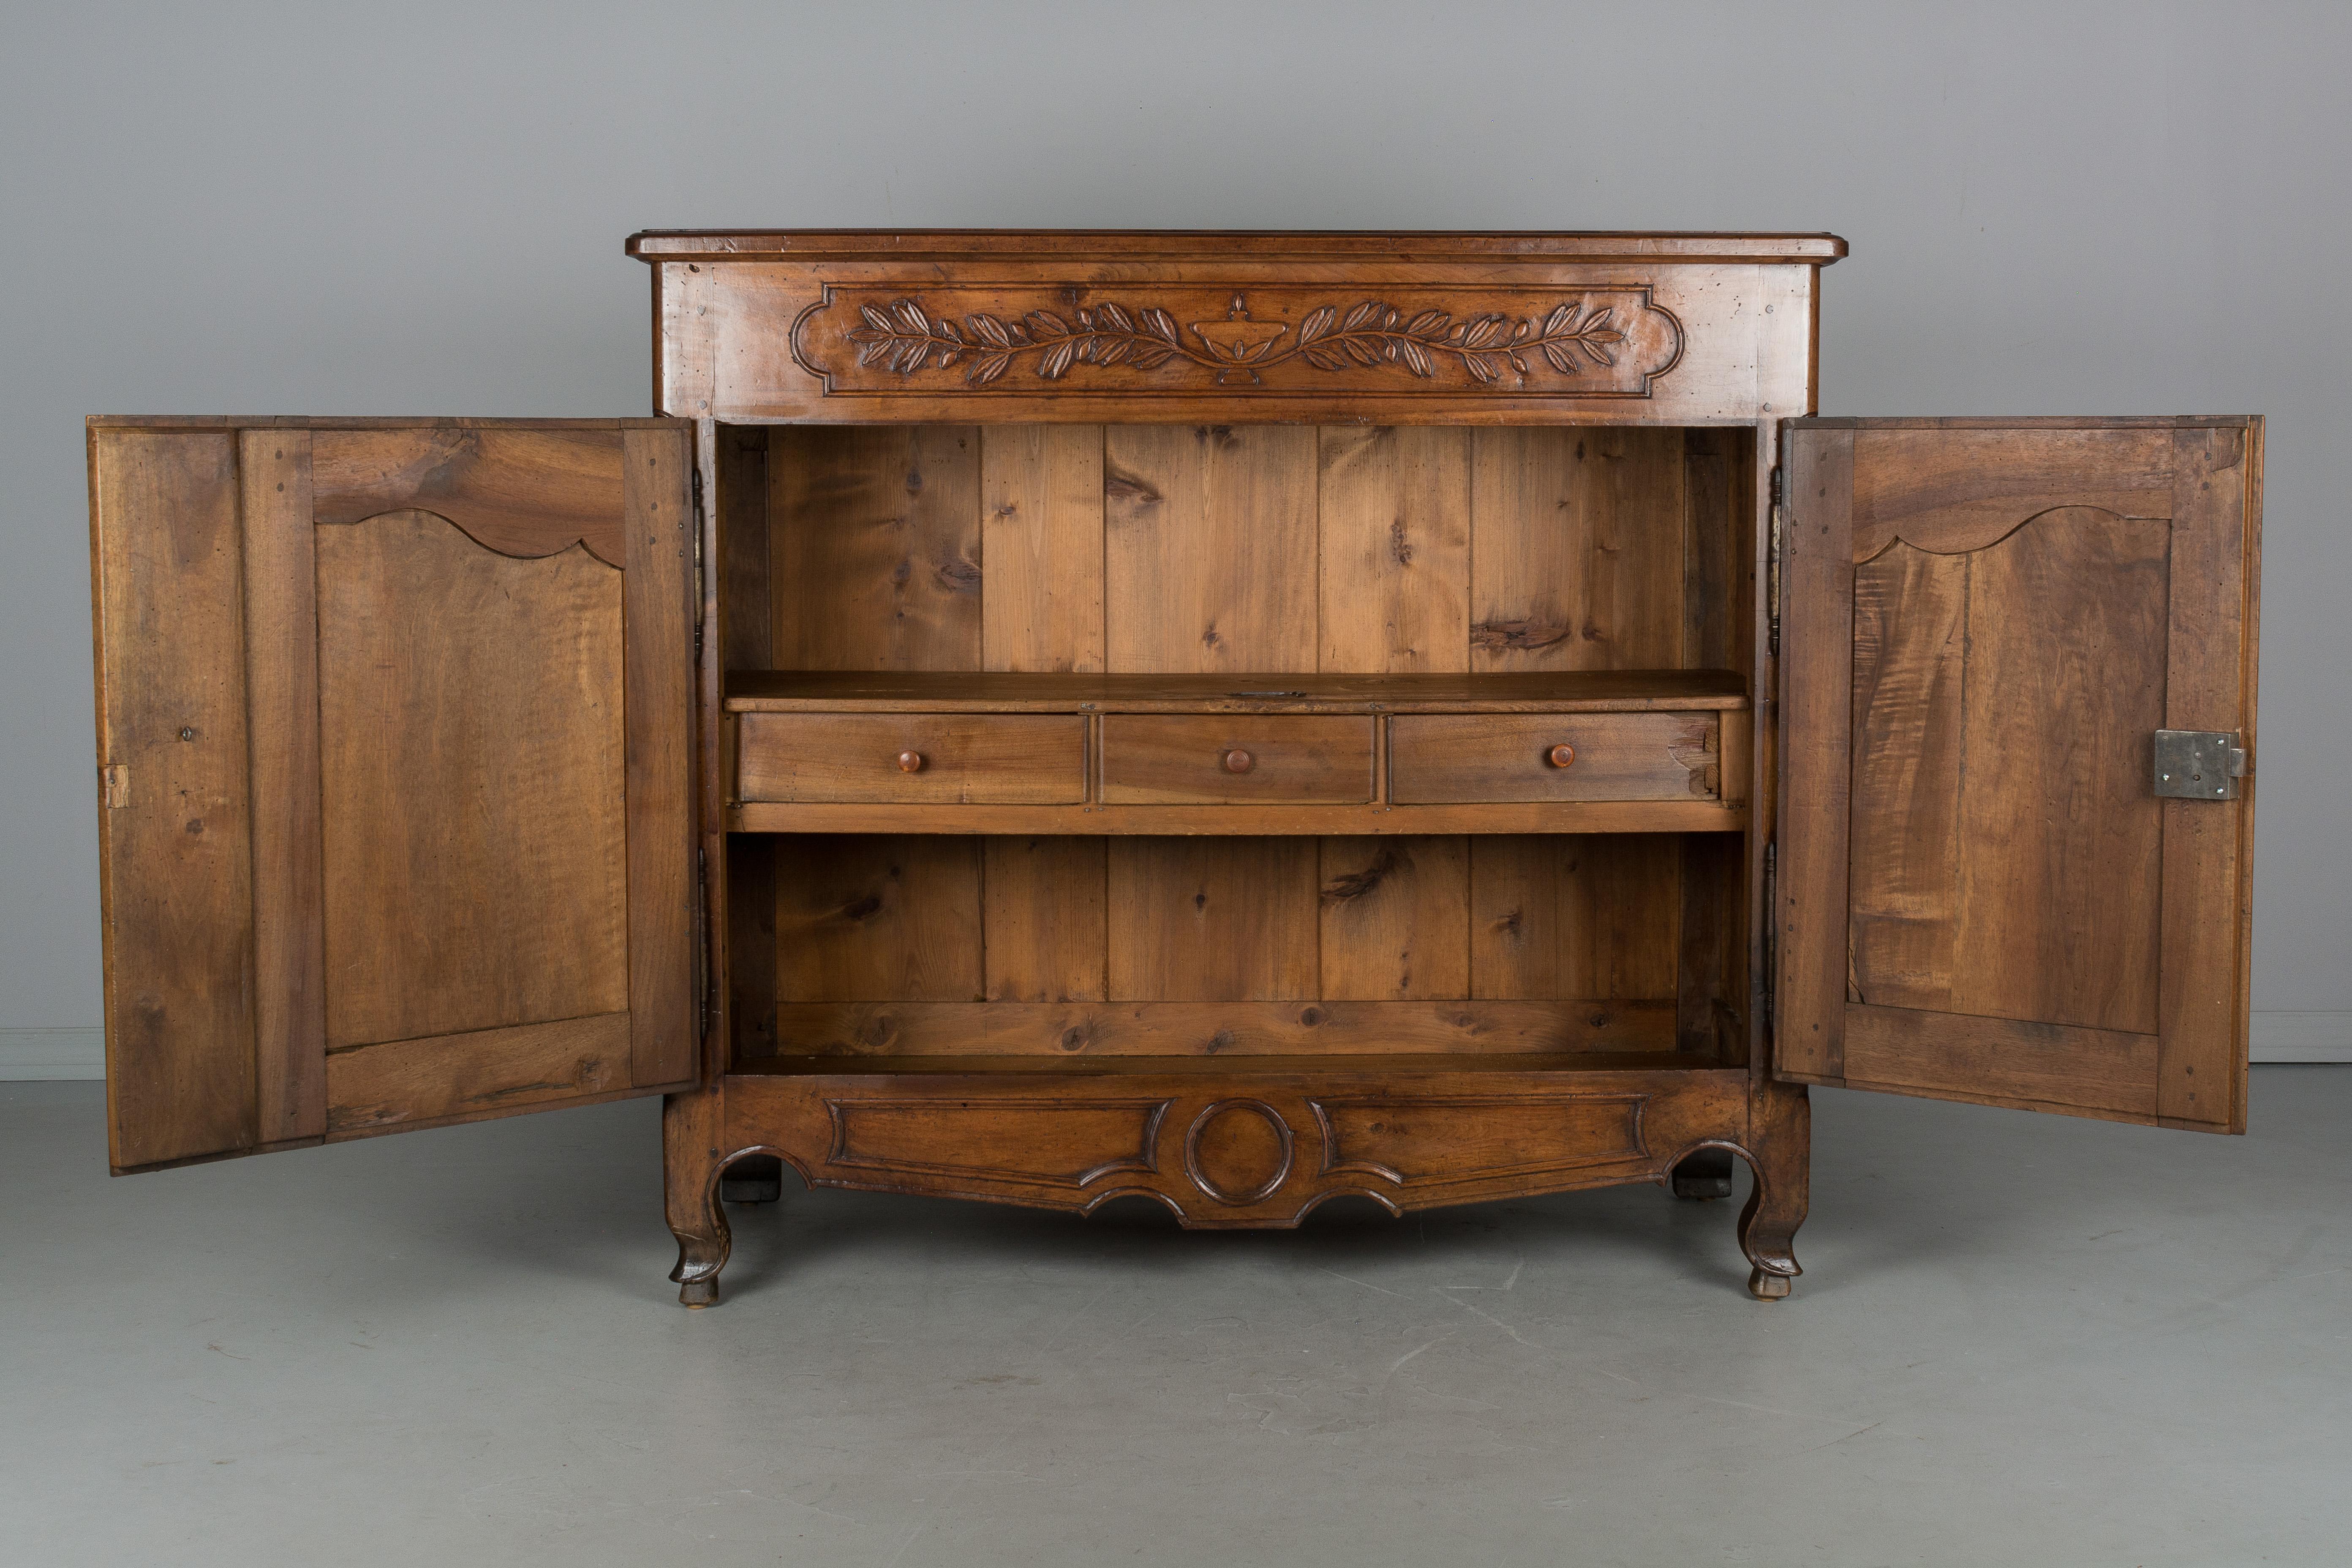 French 19th Century Louis XV Style Buffet or Sideboard For Sale